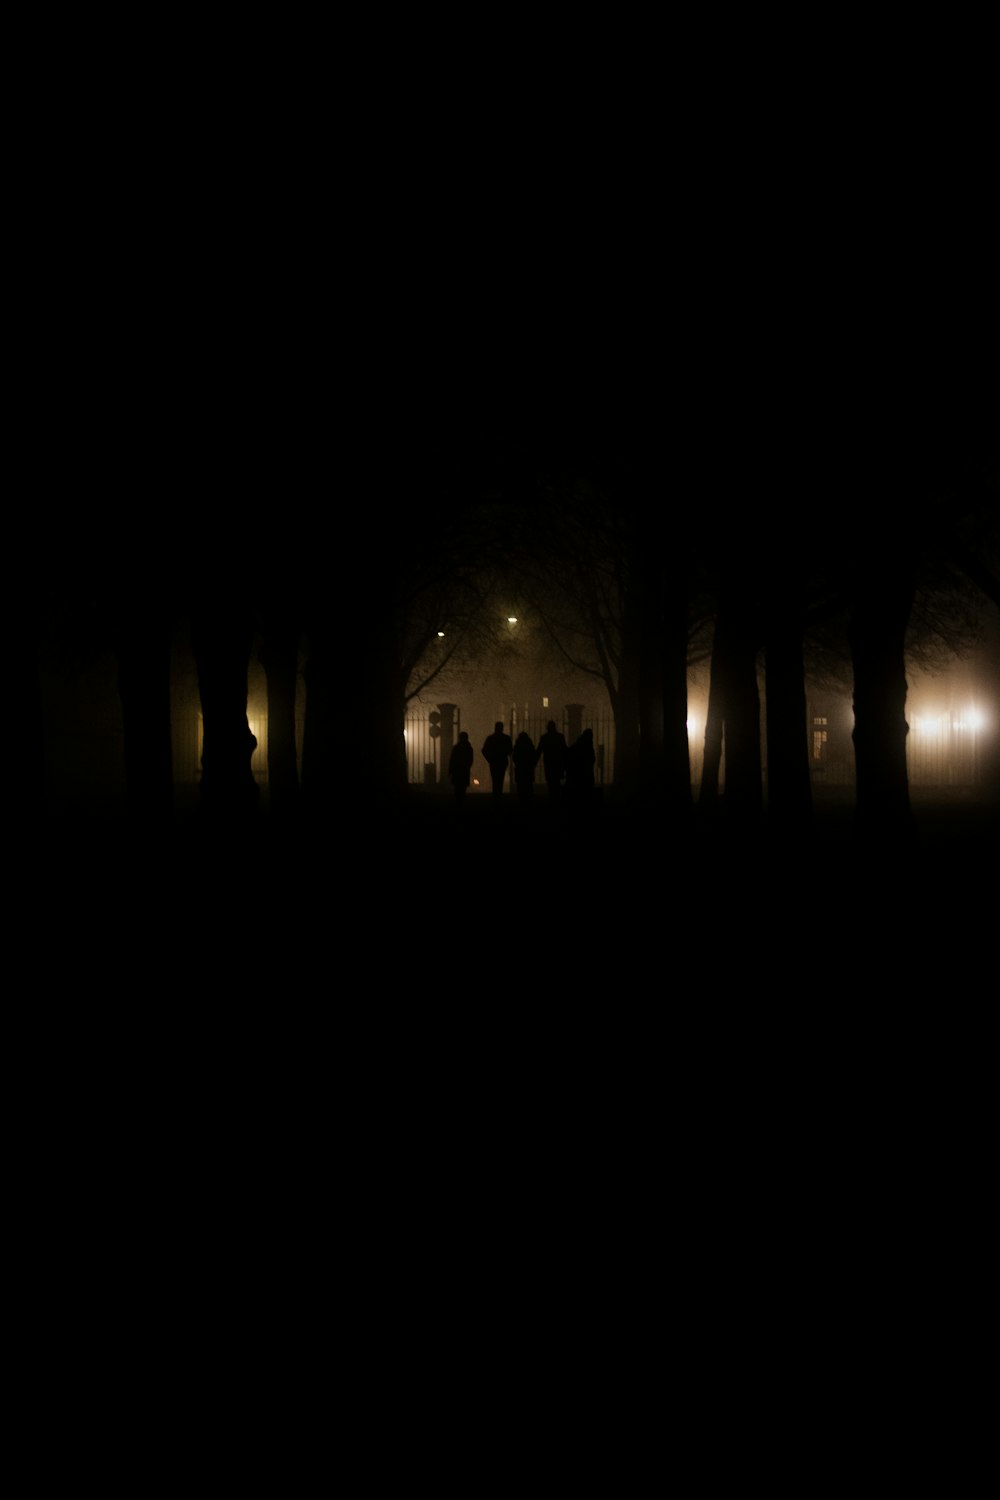 a group of people standing in a dark forest